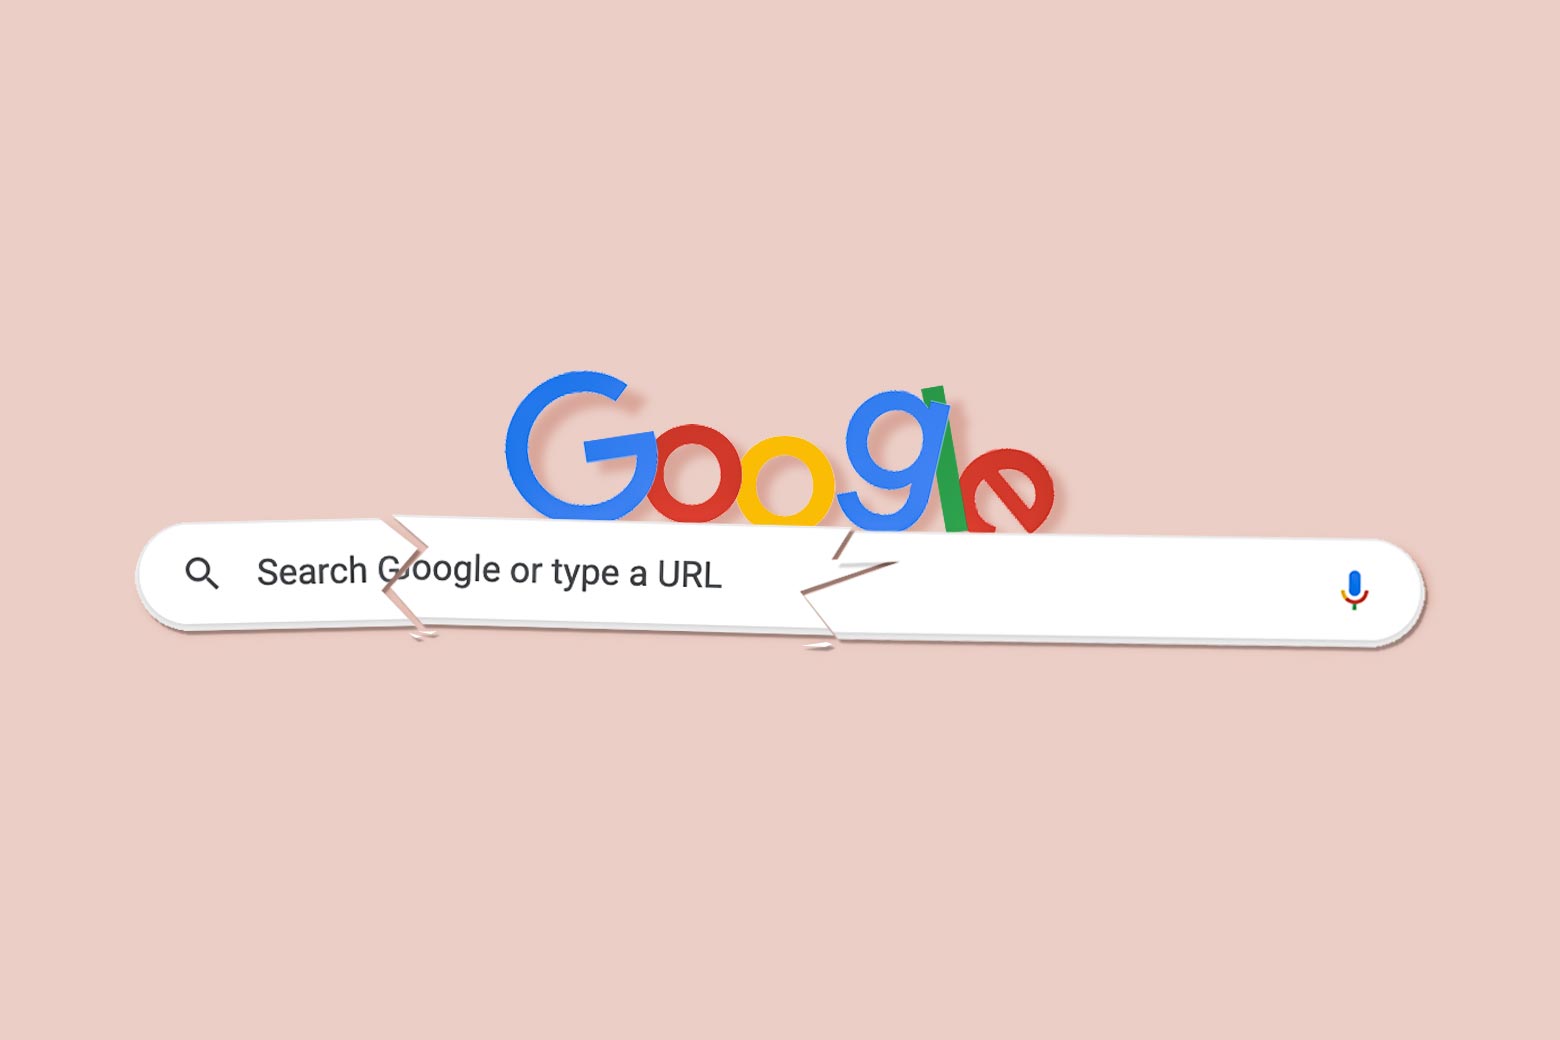 The Google logo and search bar are shattered.